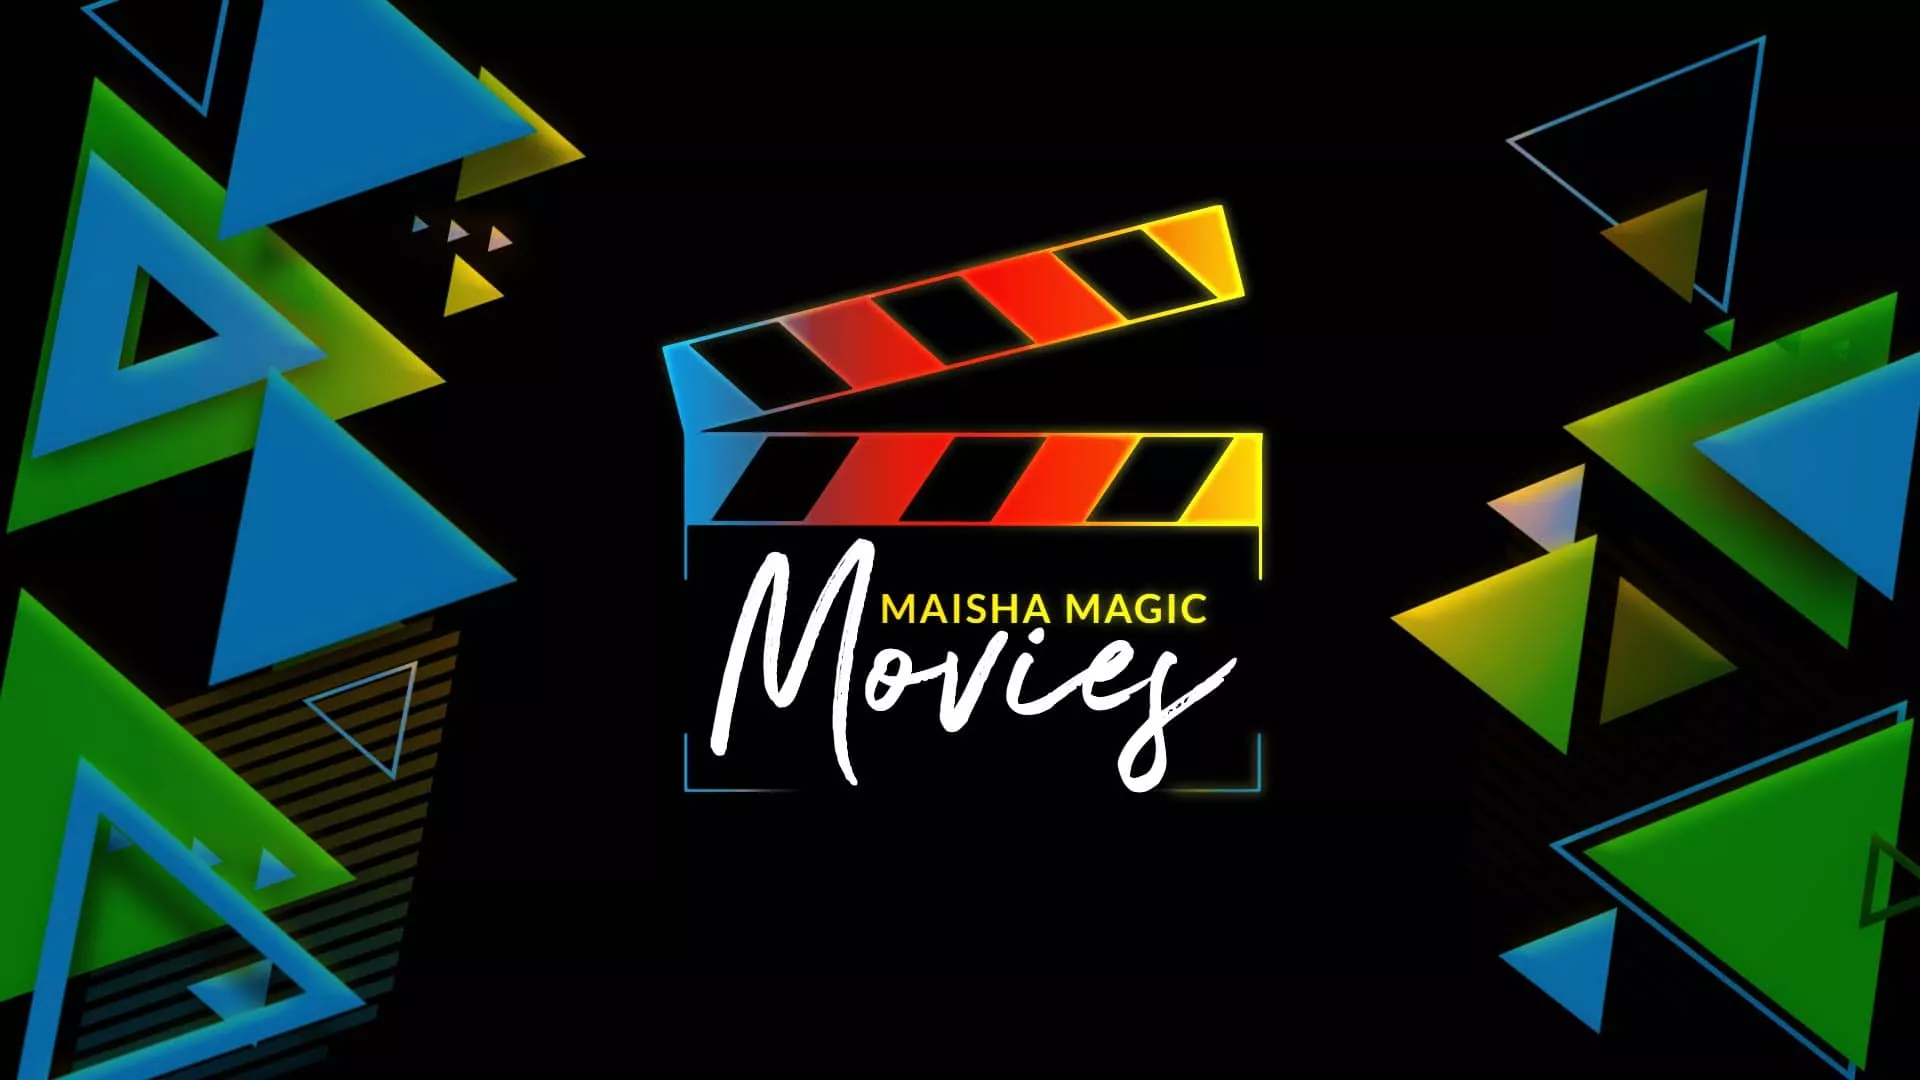 21 New Ugandan Films to Feature on Maisha Magic Movies Before End of Year